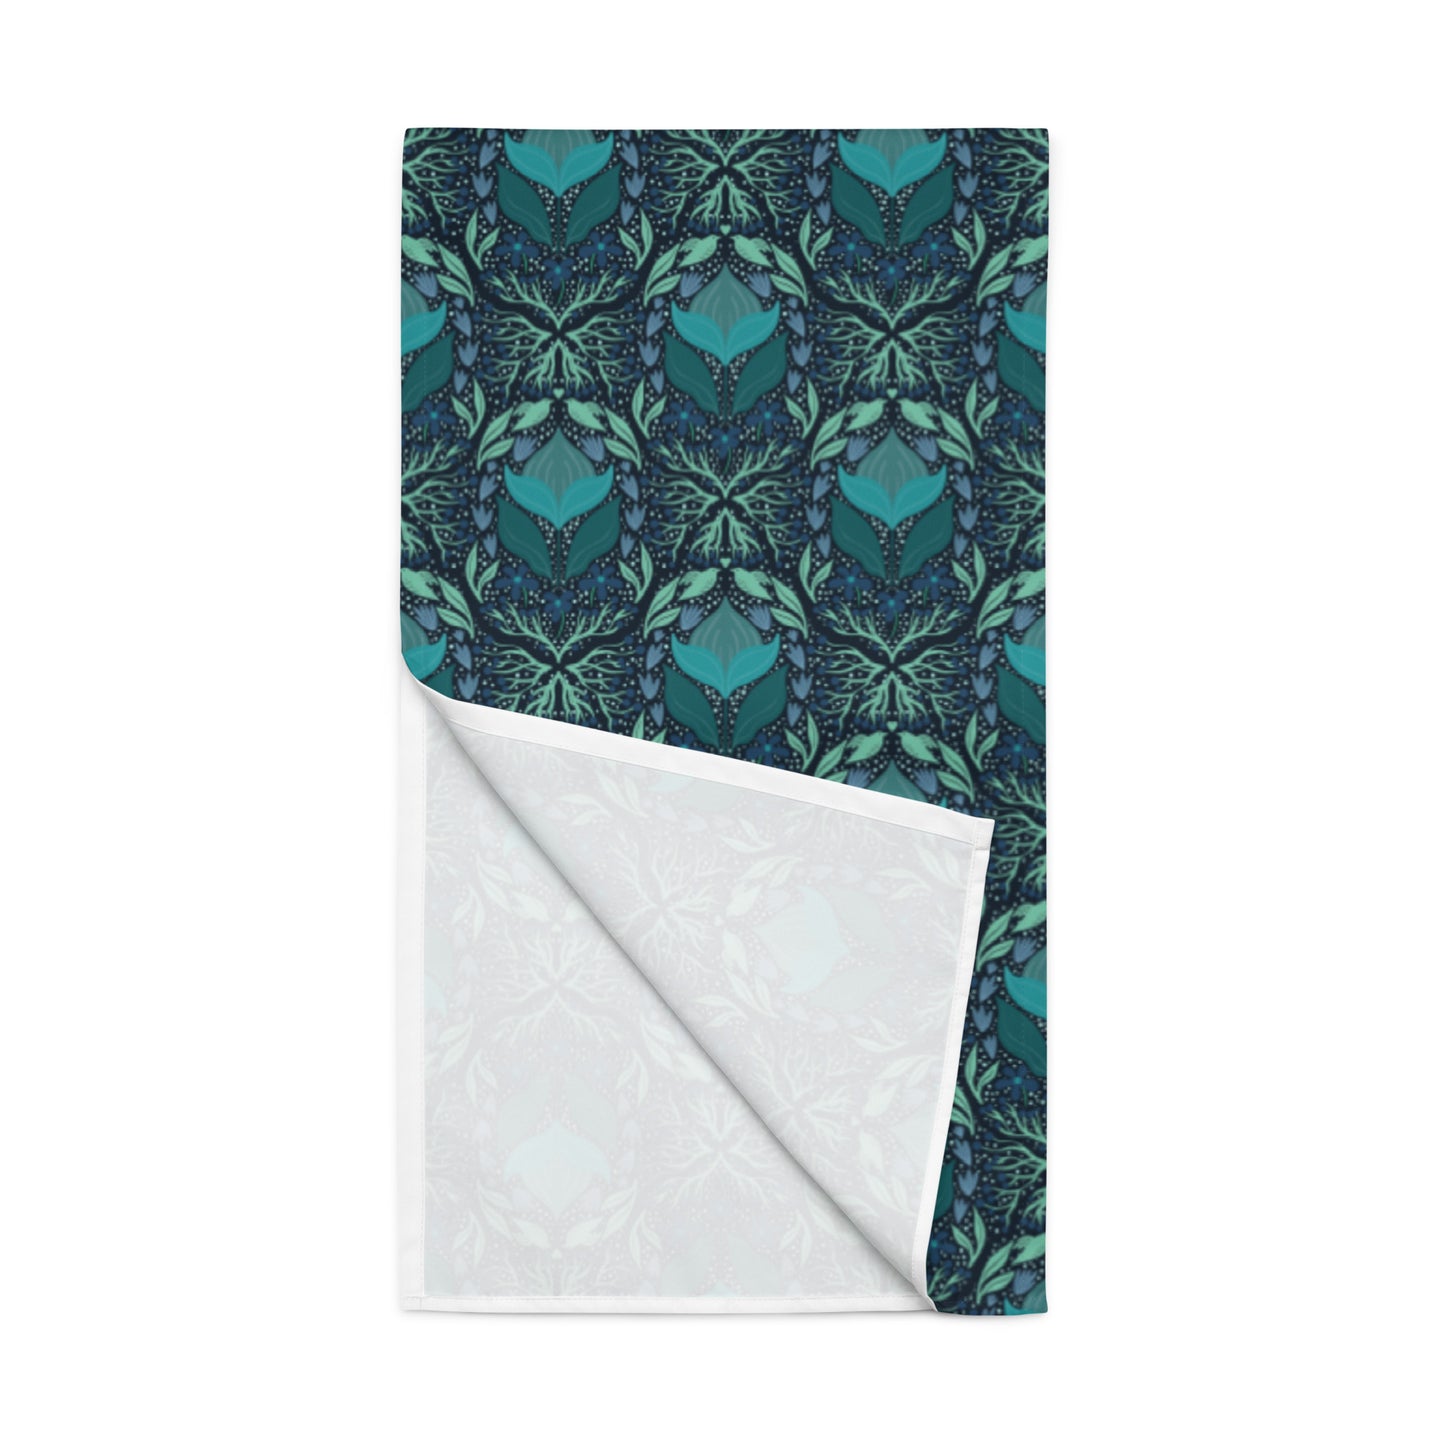 Teal Floral Table runner